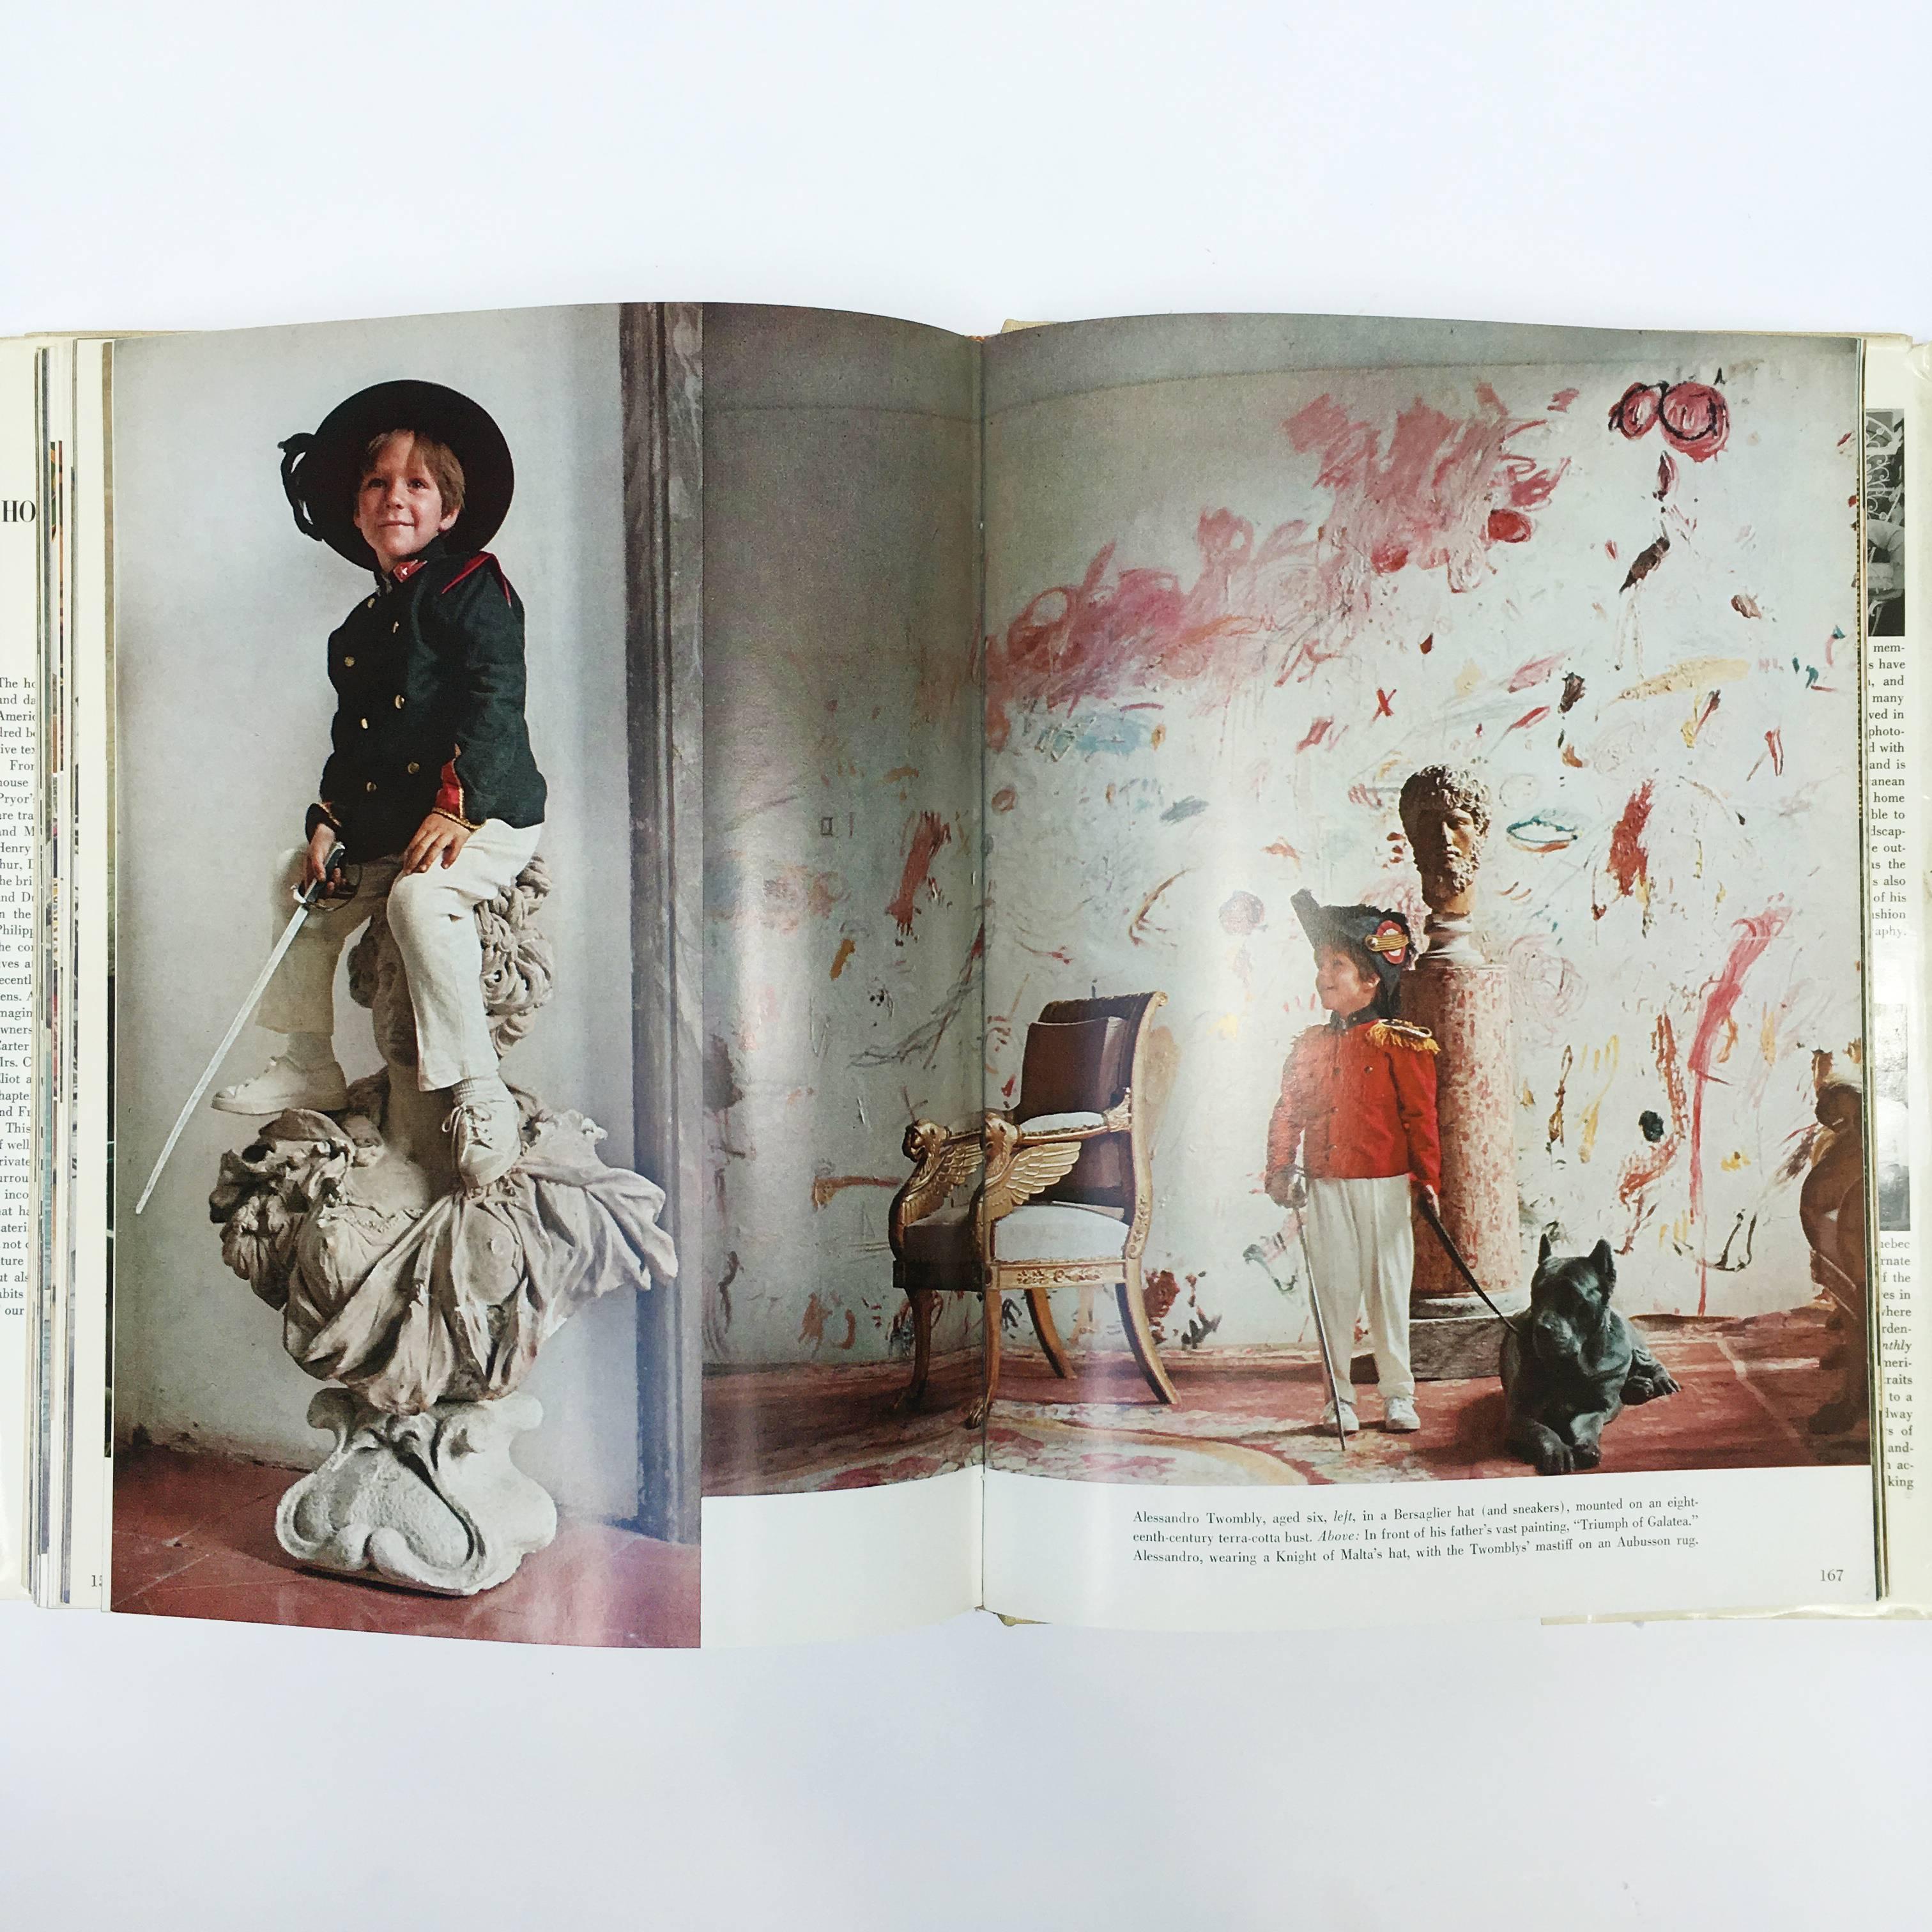 Modern Vogue's Book of Houses, Gardens, People - Horst, Vreeland, Lawford - 1st, 1968 For Sale